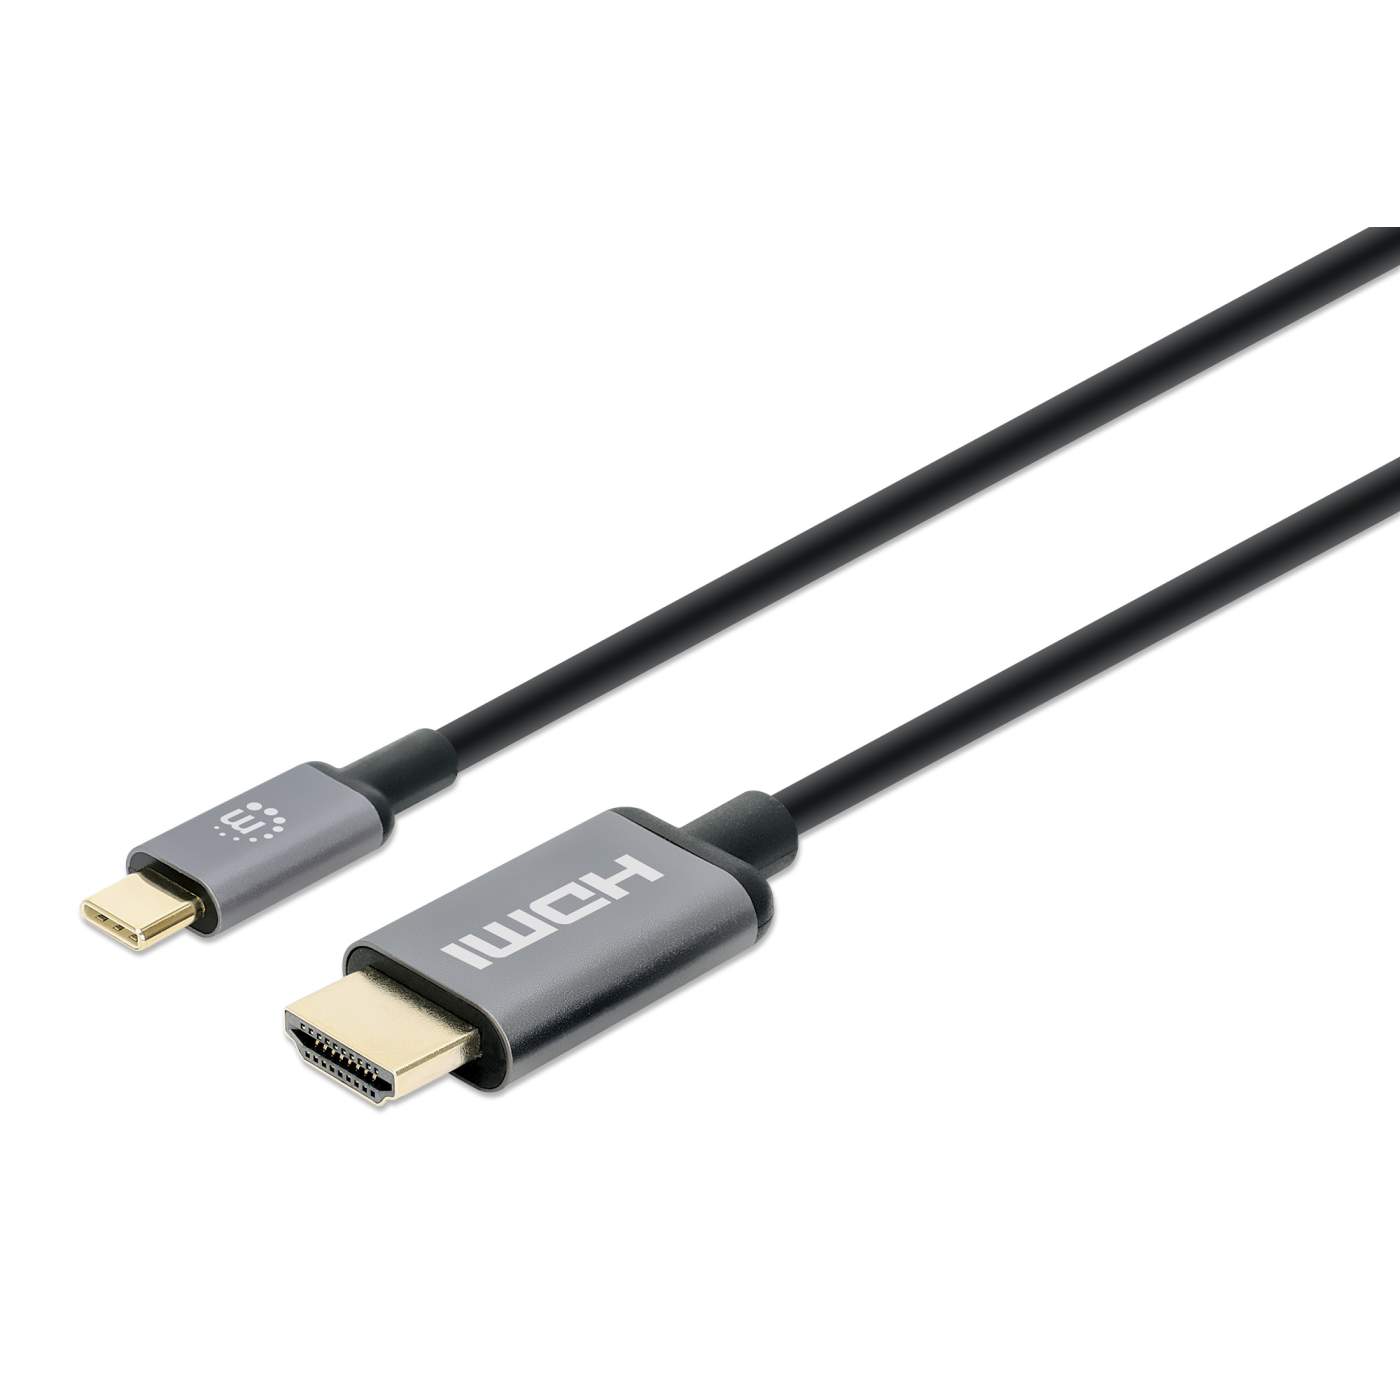 USB-C to HDMI Adapter Cable Image 1